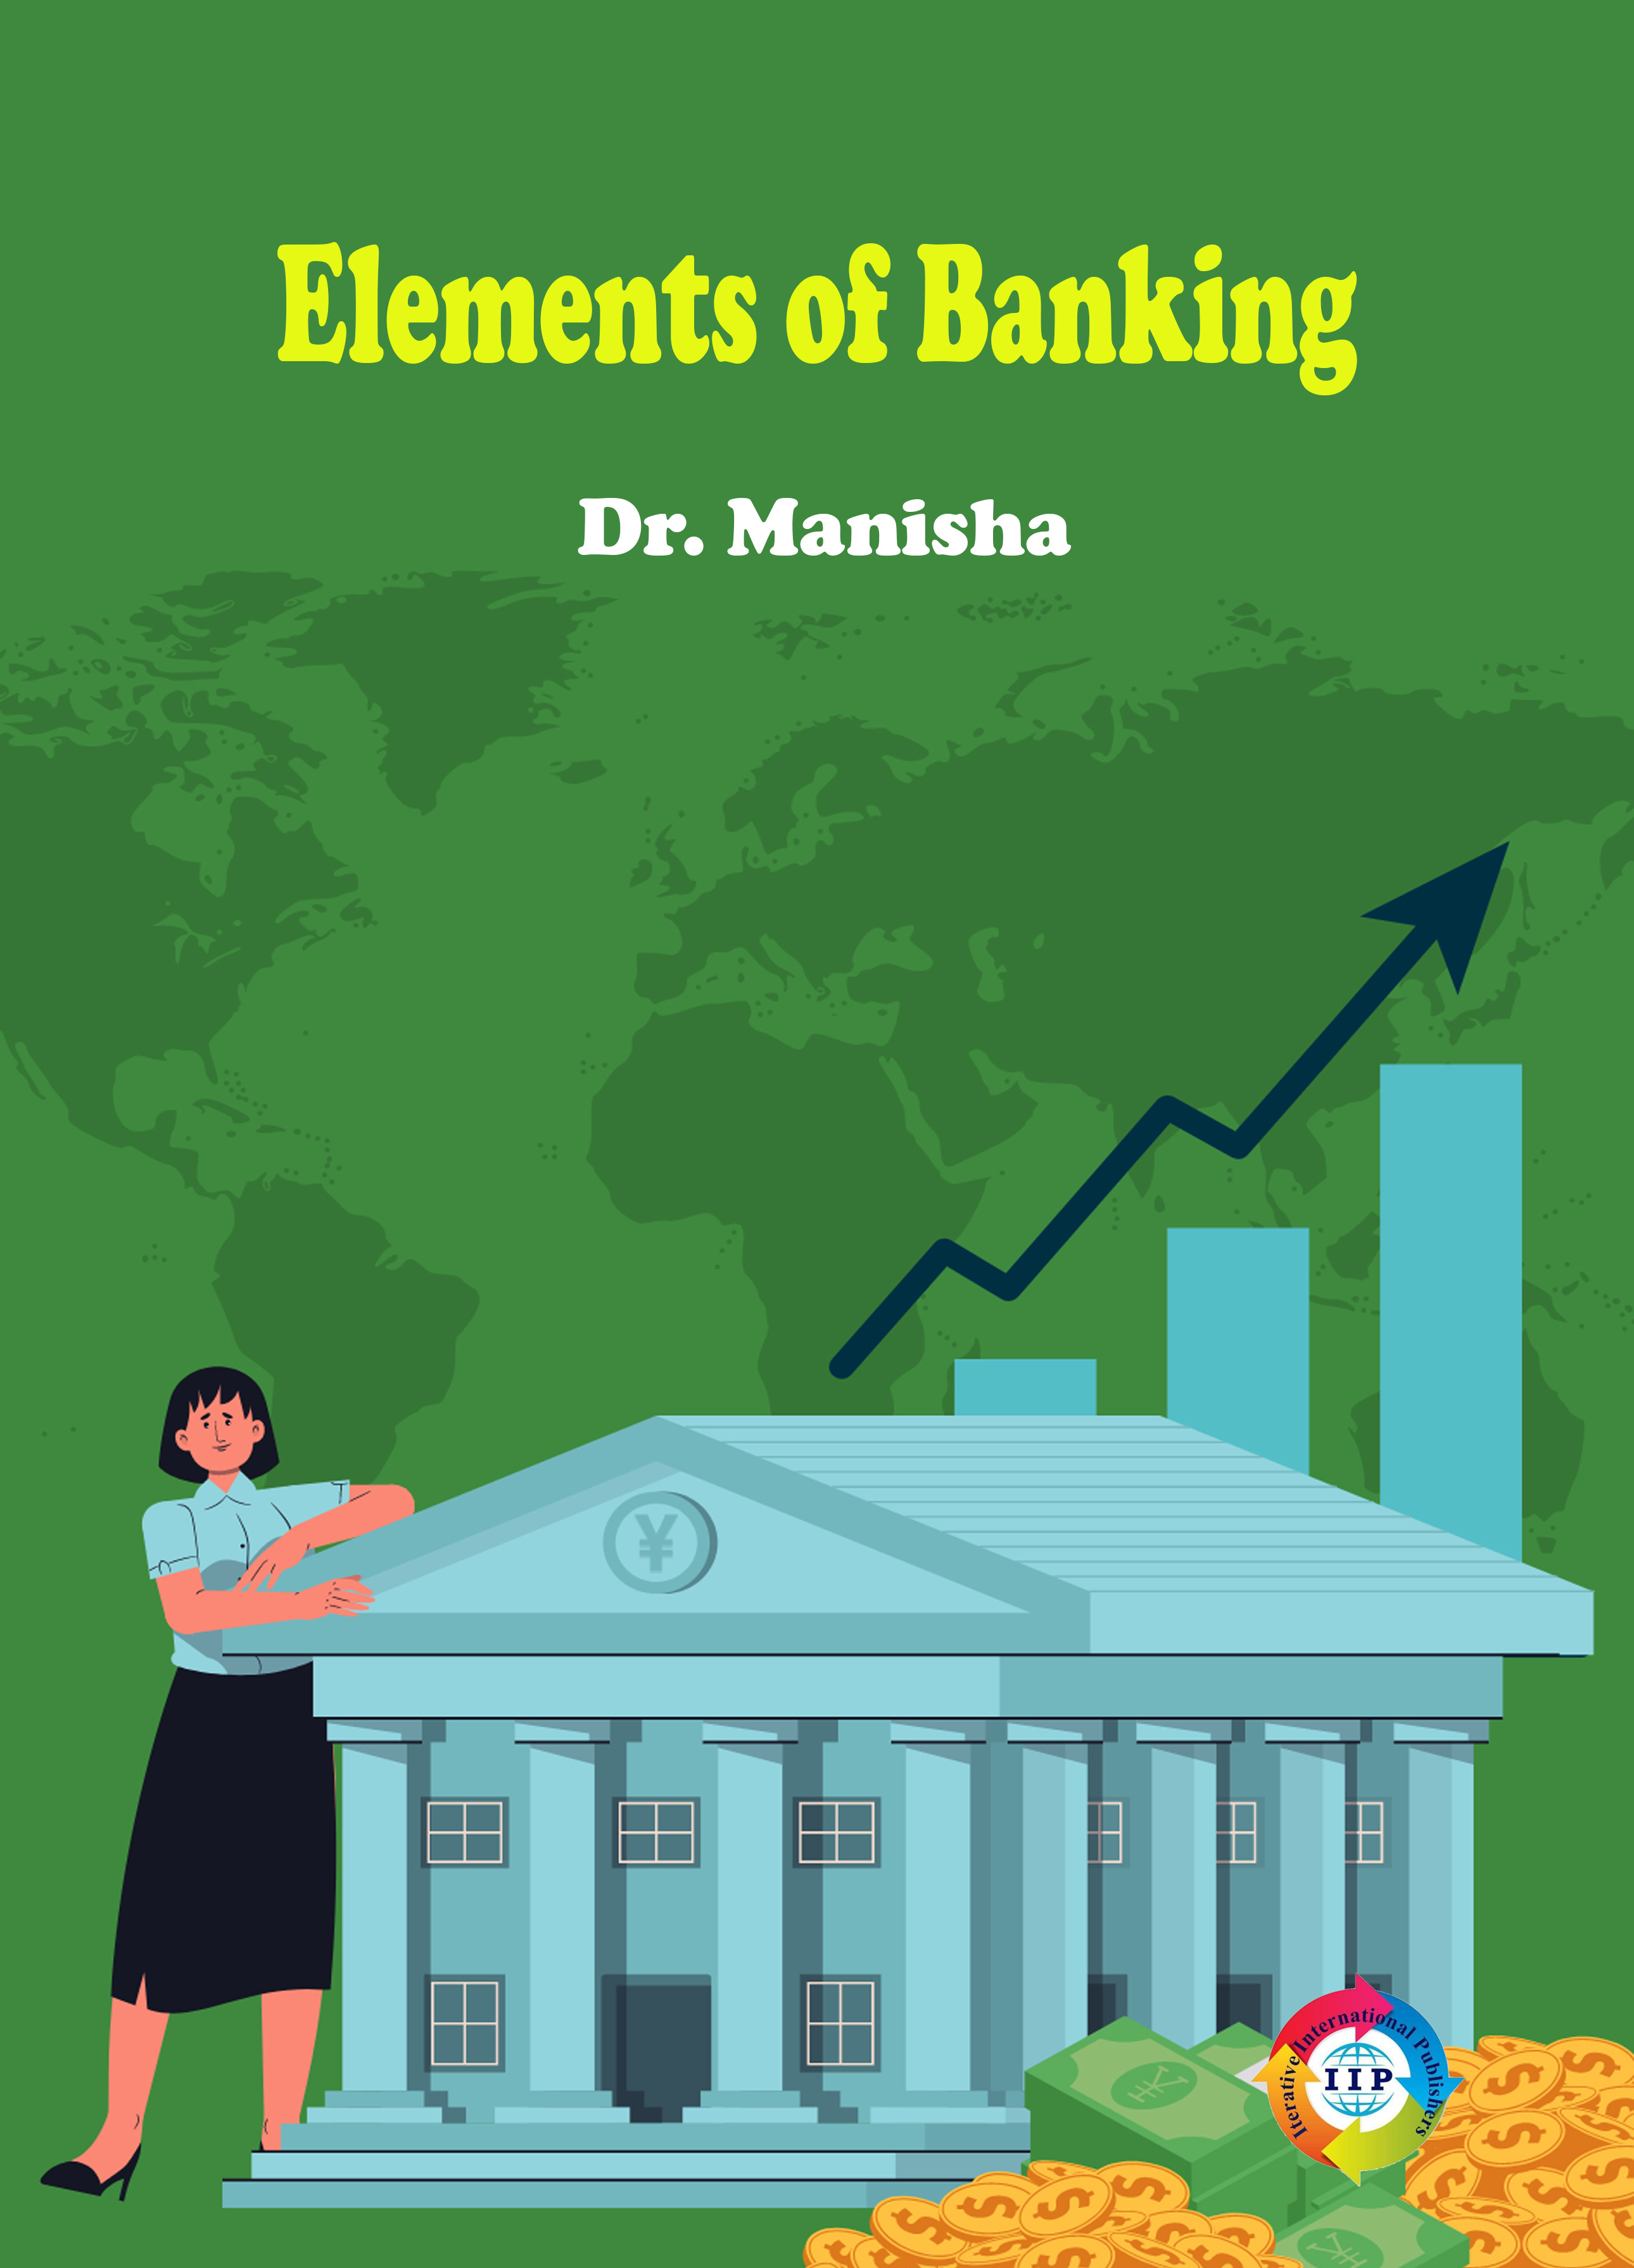 ELEMENTS OF BANKING